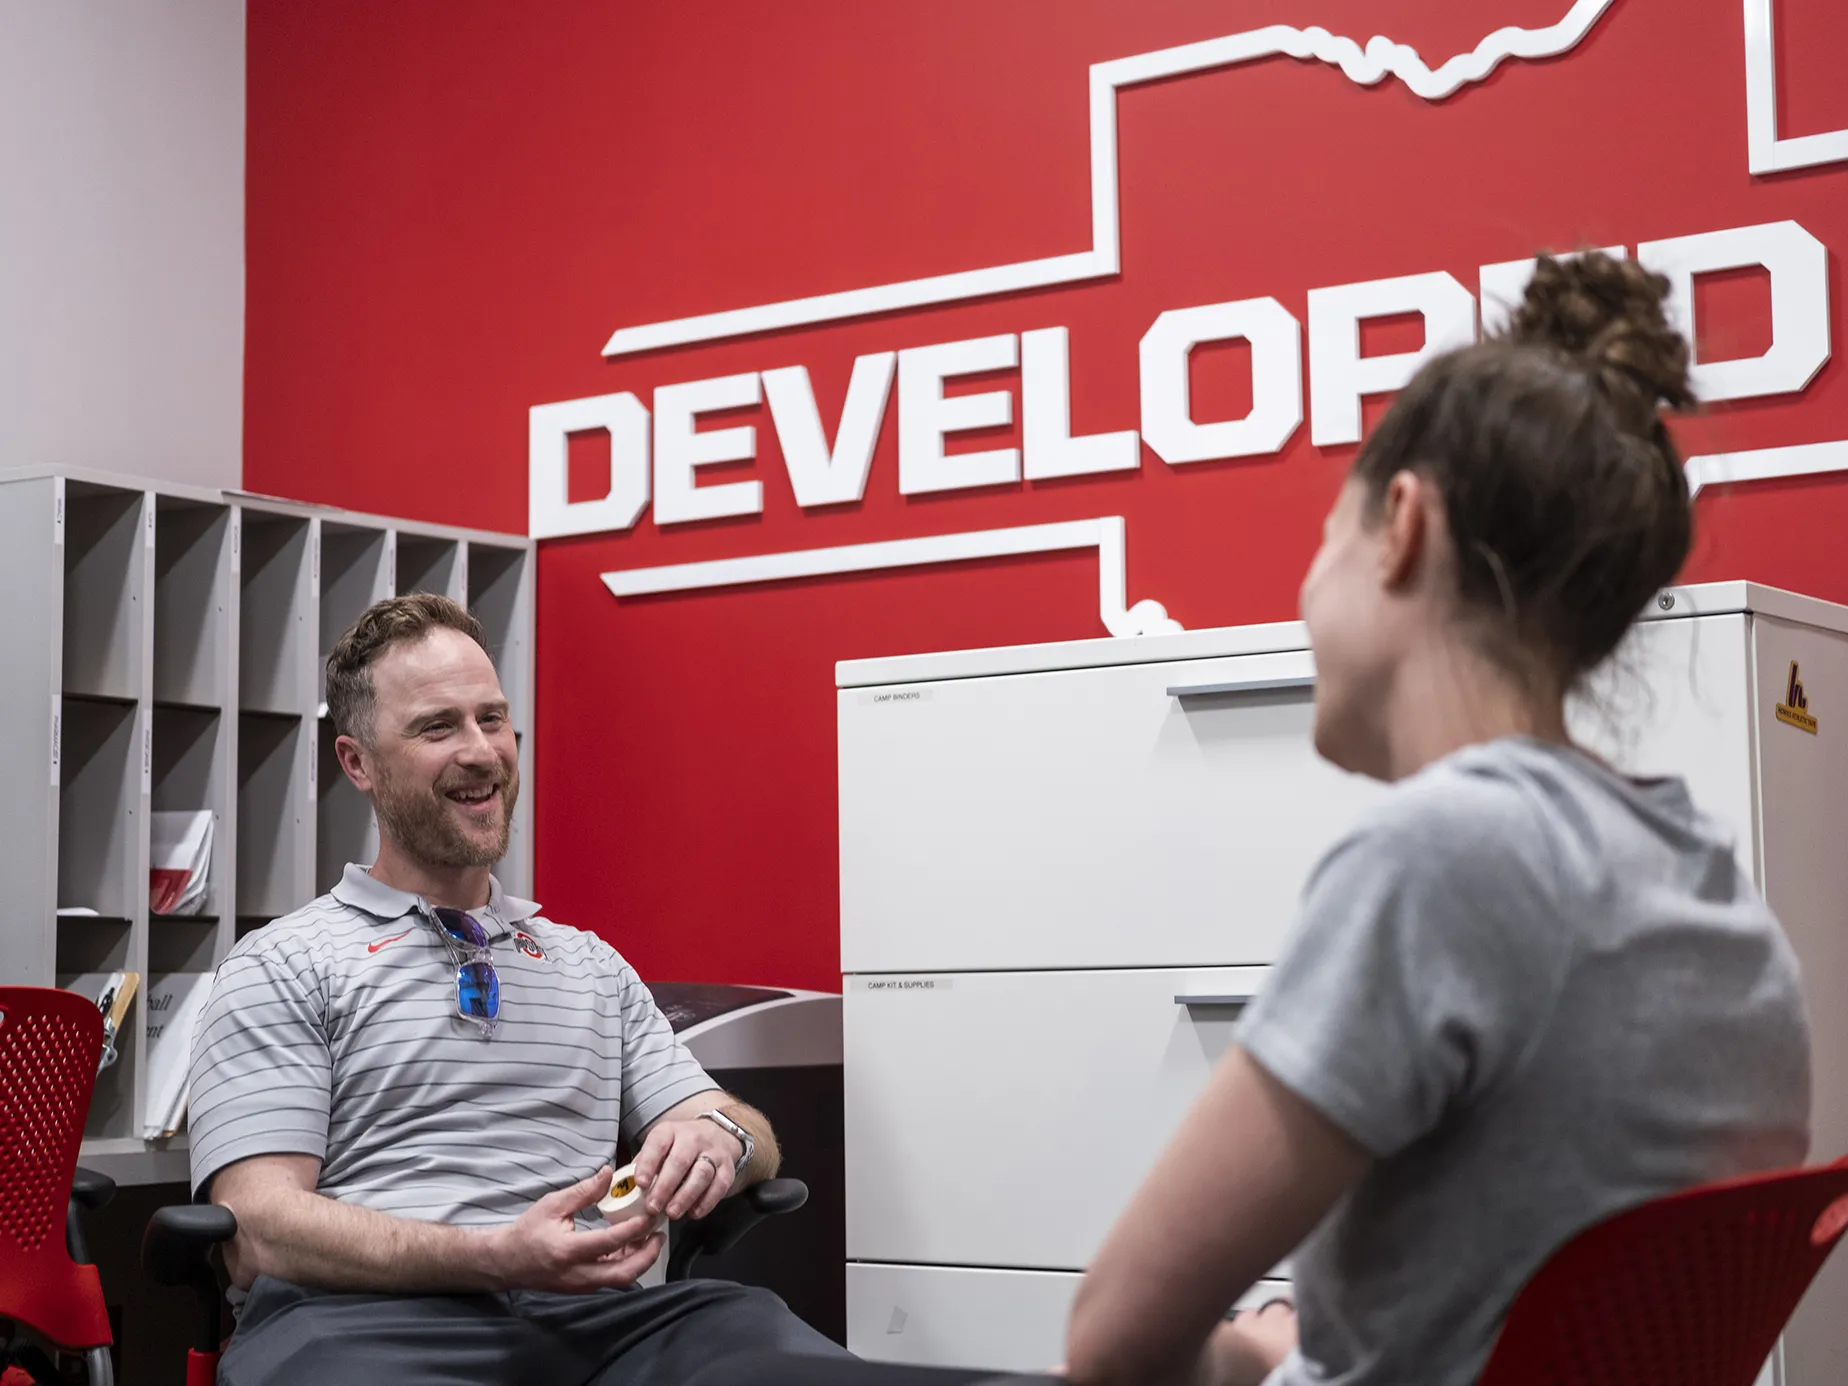 Jamey Houle, a white man in a striped Ohio State golf shirt, laughs as he speaks with a woman shown from the back. They’re both sitting in chairs in an office in the Department of Athletics building. Jamey is a white man with wavy hair and he’s looking directly at his colleague as they chat.